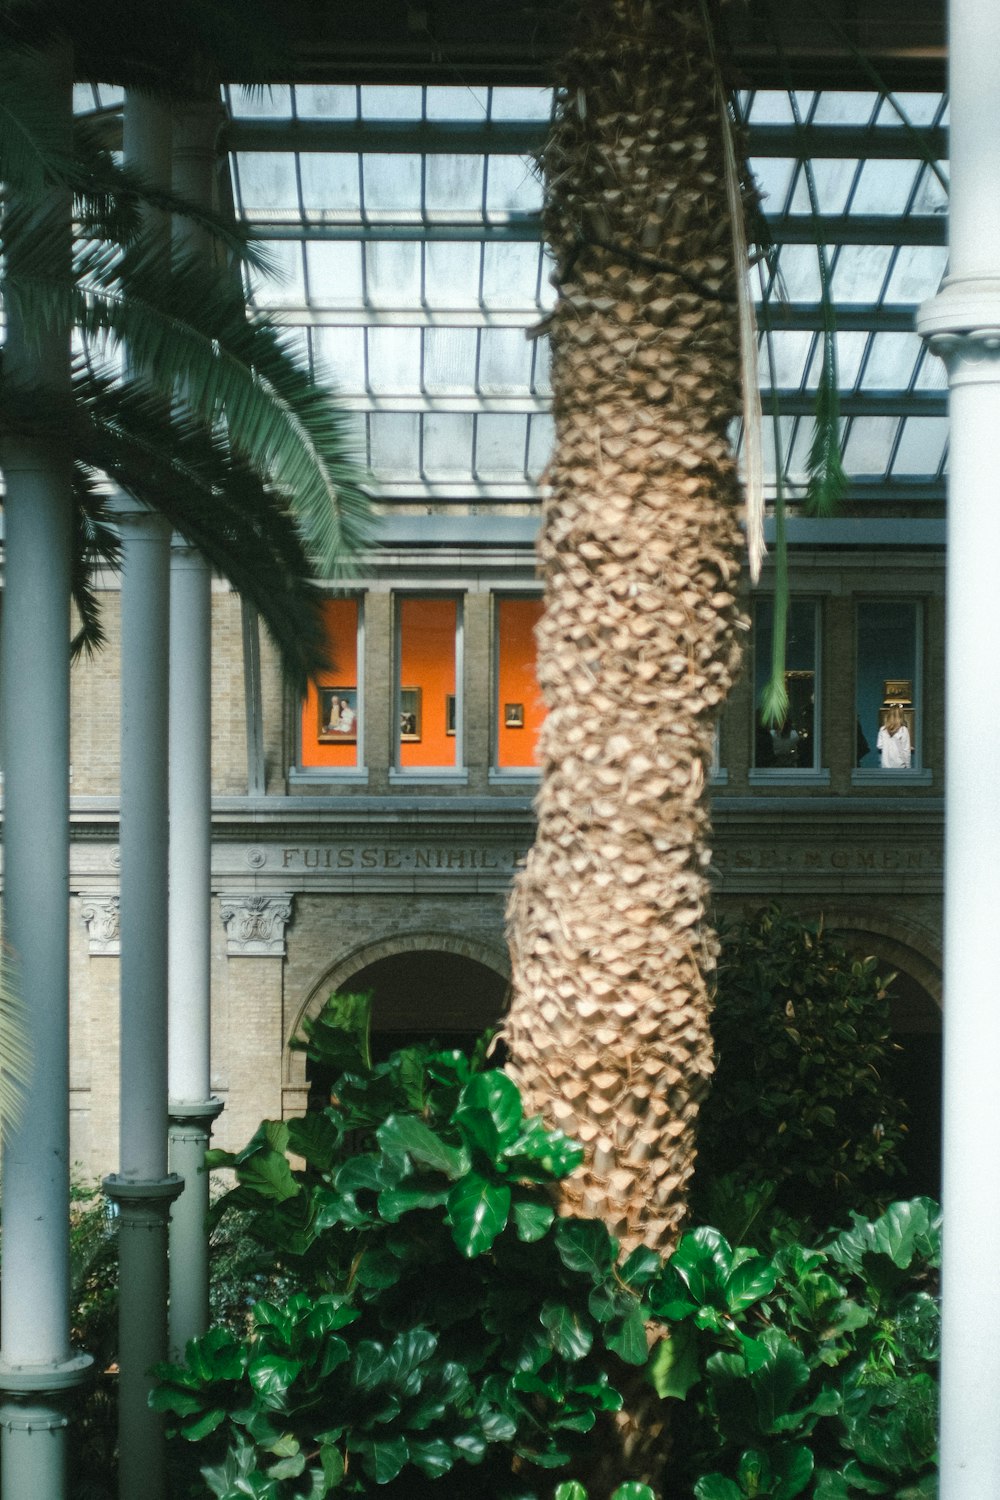 a palm tree in the middle of a building